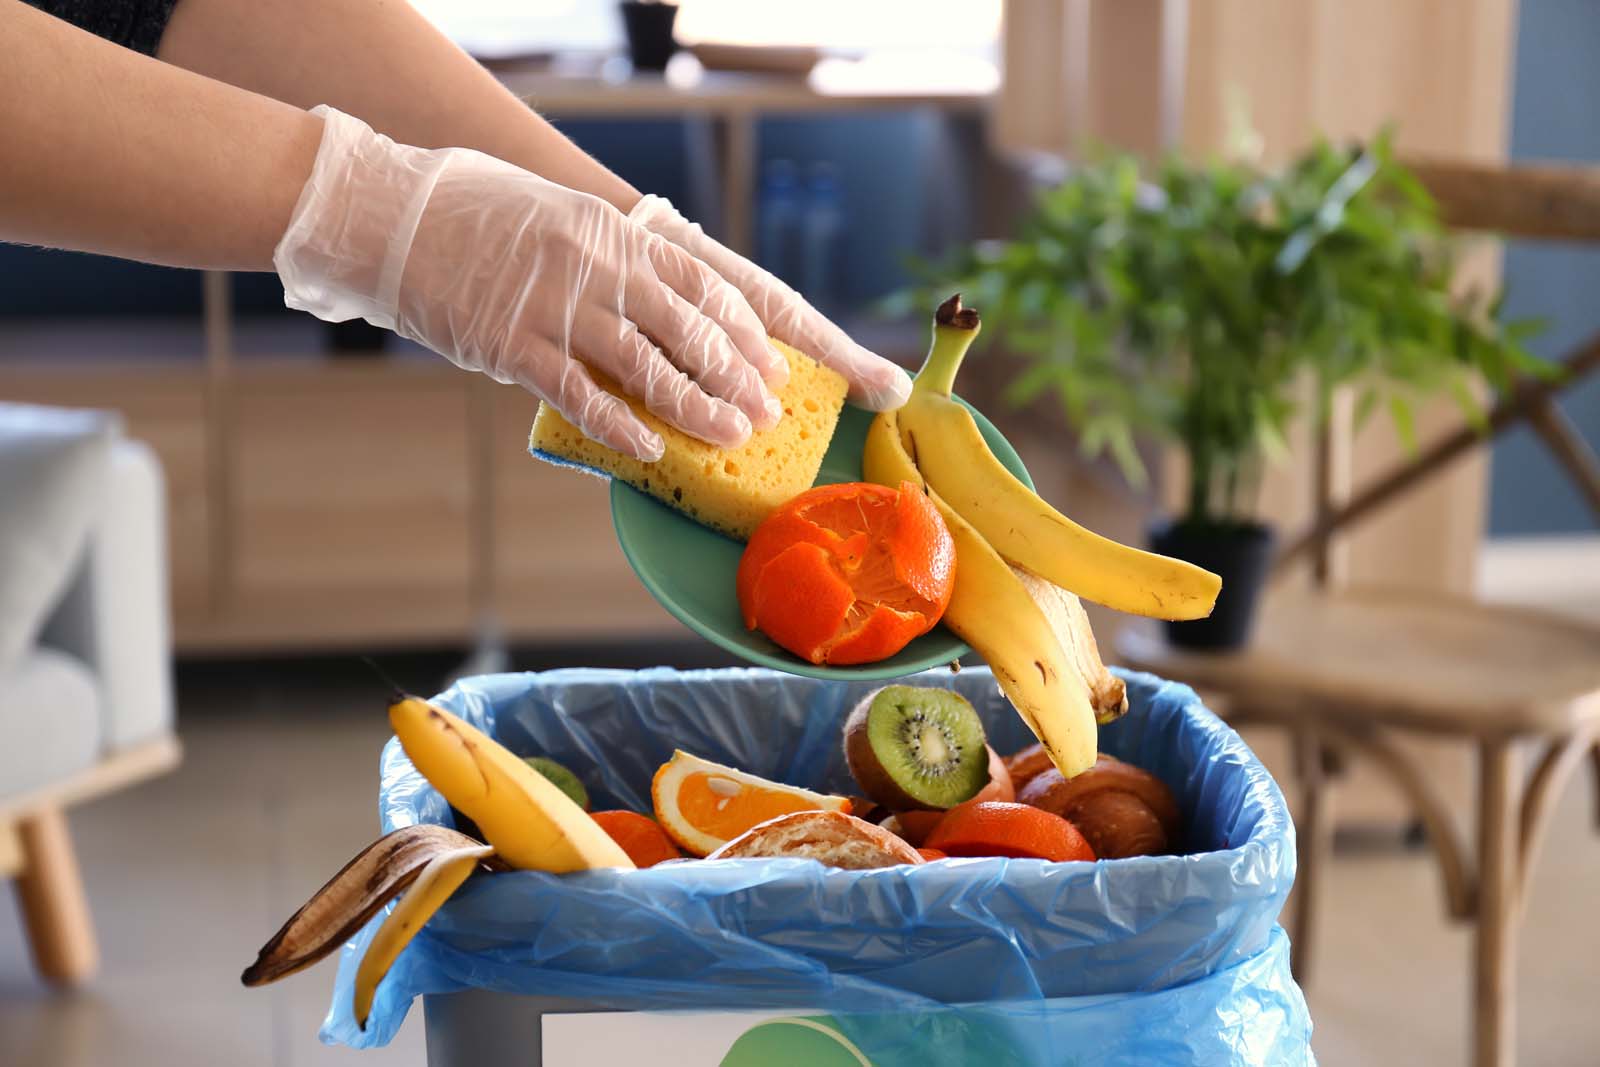 Household and food waste